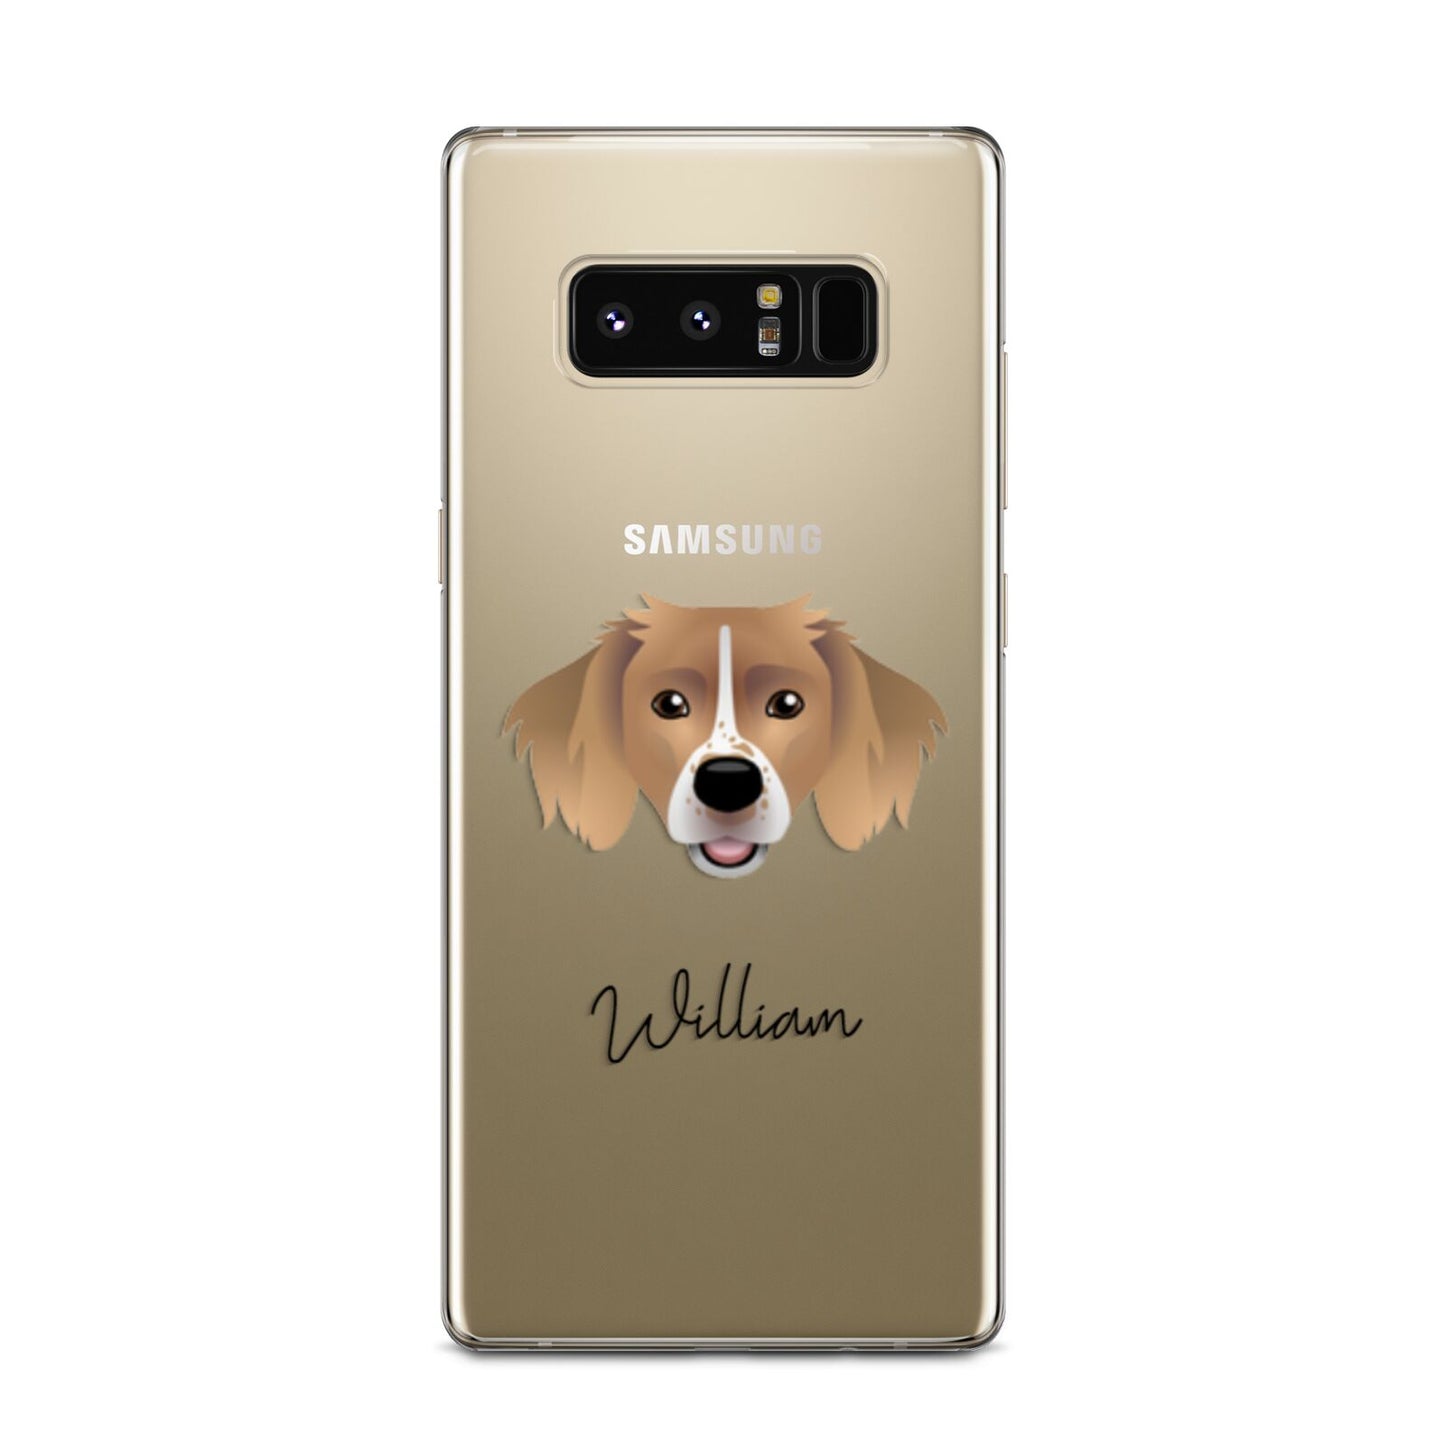 Sprollie Personalised Samsung Galaxy Note 8 Case